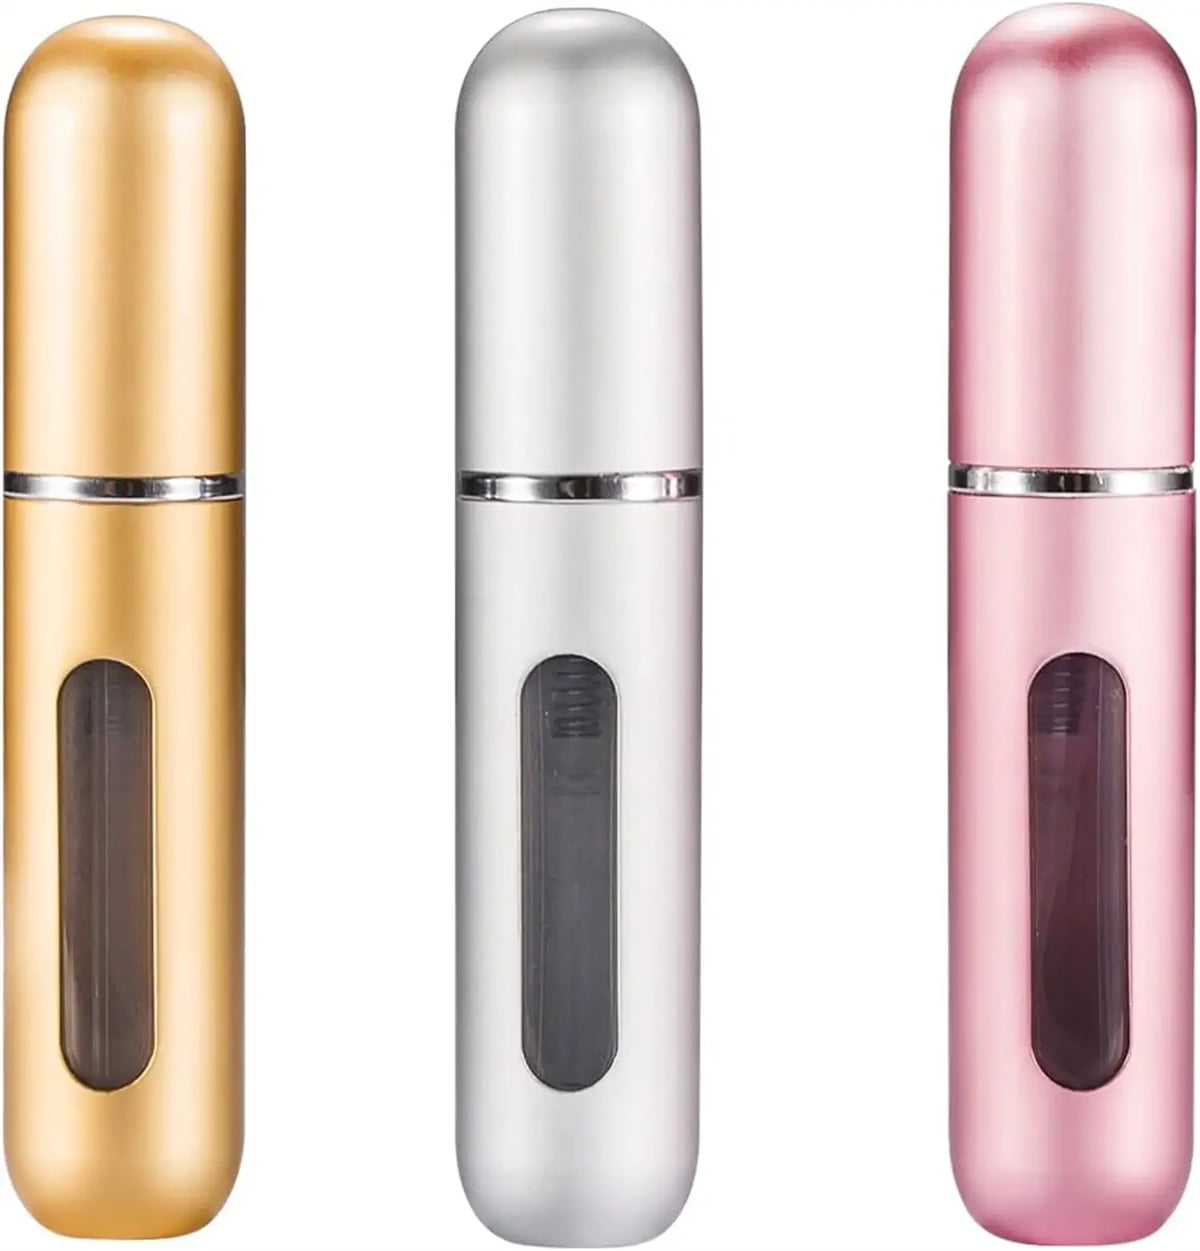 HINNASWA Portable Mini Refillable Perfume Empty Spray Bottle Atomizer  Bottom Refill Pump Case for Traveling and Outgoing 3 Pcs Pack of 5ml  (Sliver, Gold, Pink)